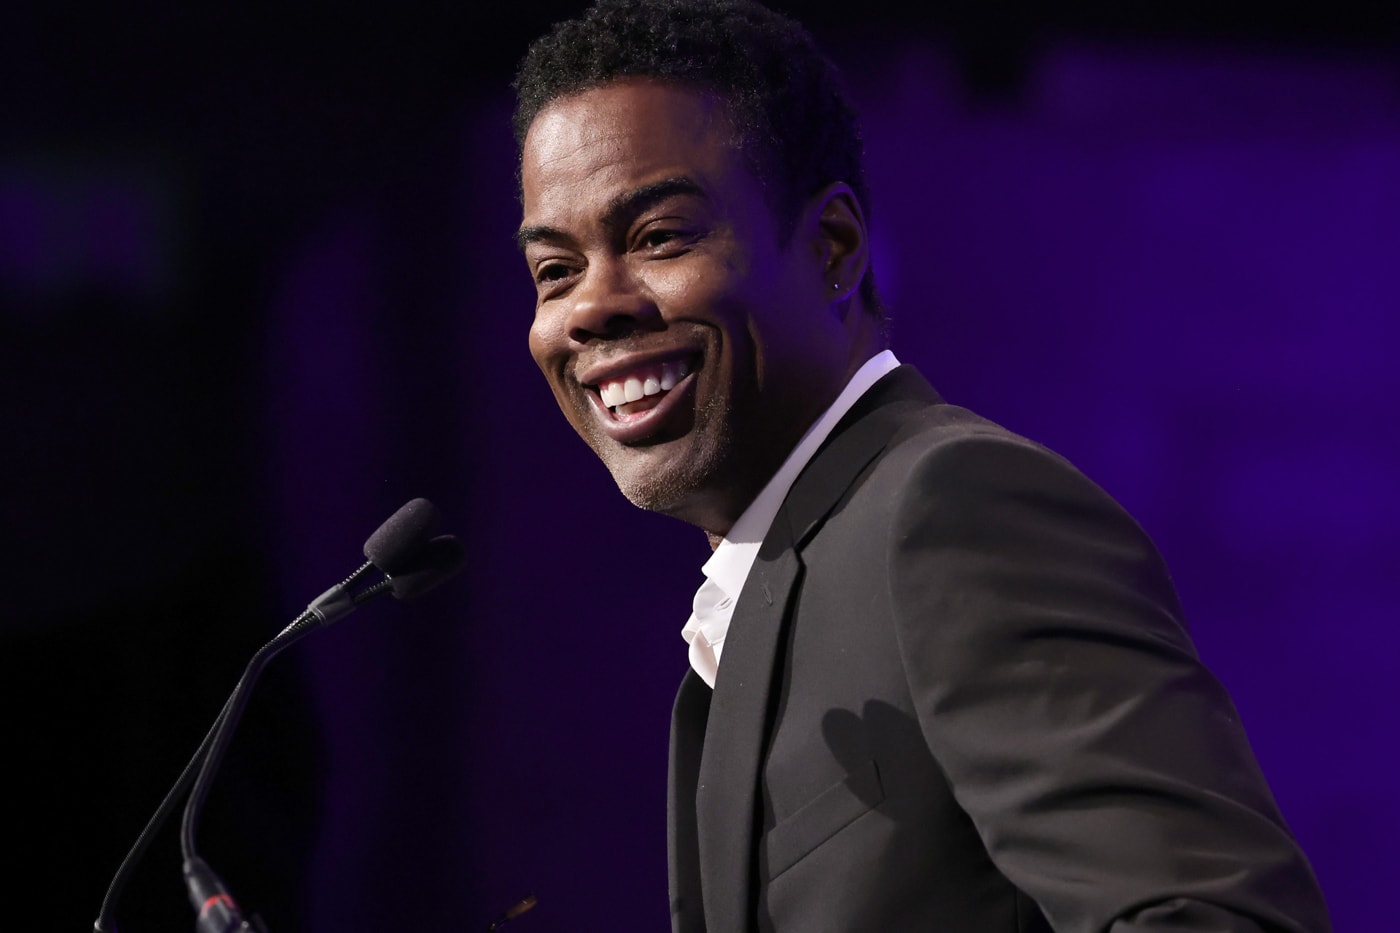 Chris Rock To Direct 'Another Round' Remake With Leonardo Dicaprio Producing 2020 Thomas Vinterberg-directed black comedy oscar winning best international feature film biff appian way makeready fifth season madds mikkelson